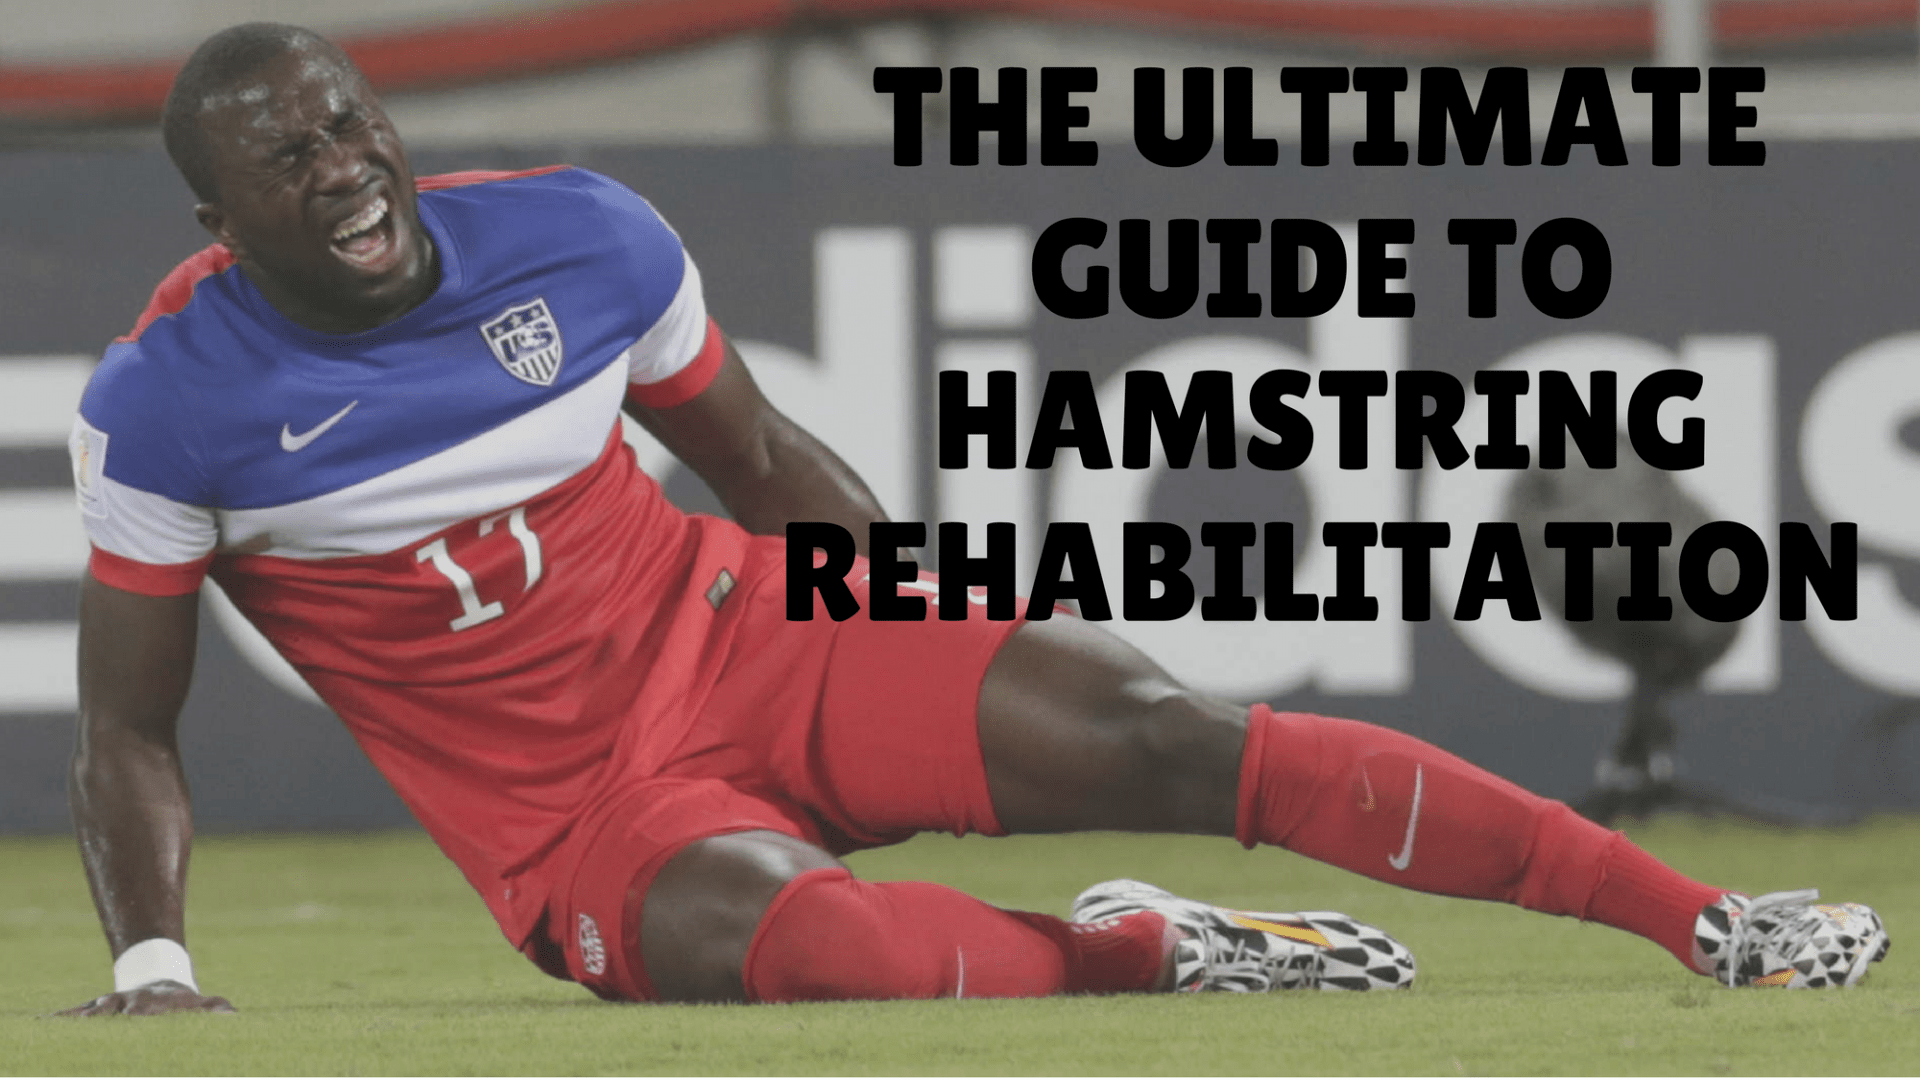 Featured image for “The Ultimate Guide to Hamstring Strain Rehabilitation”